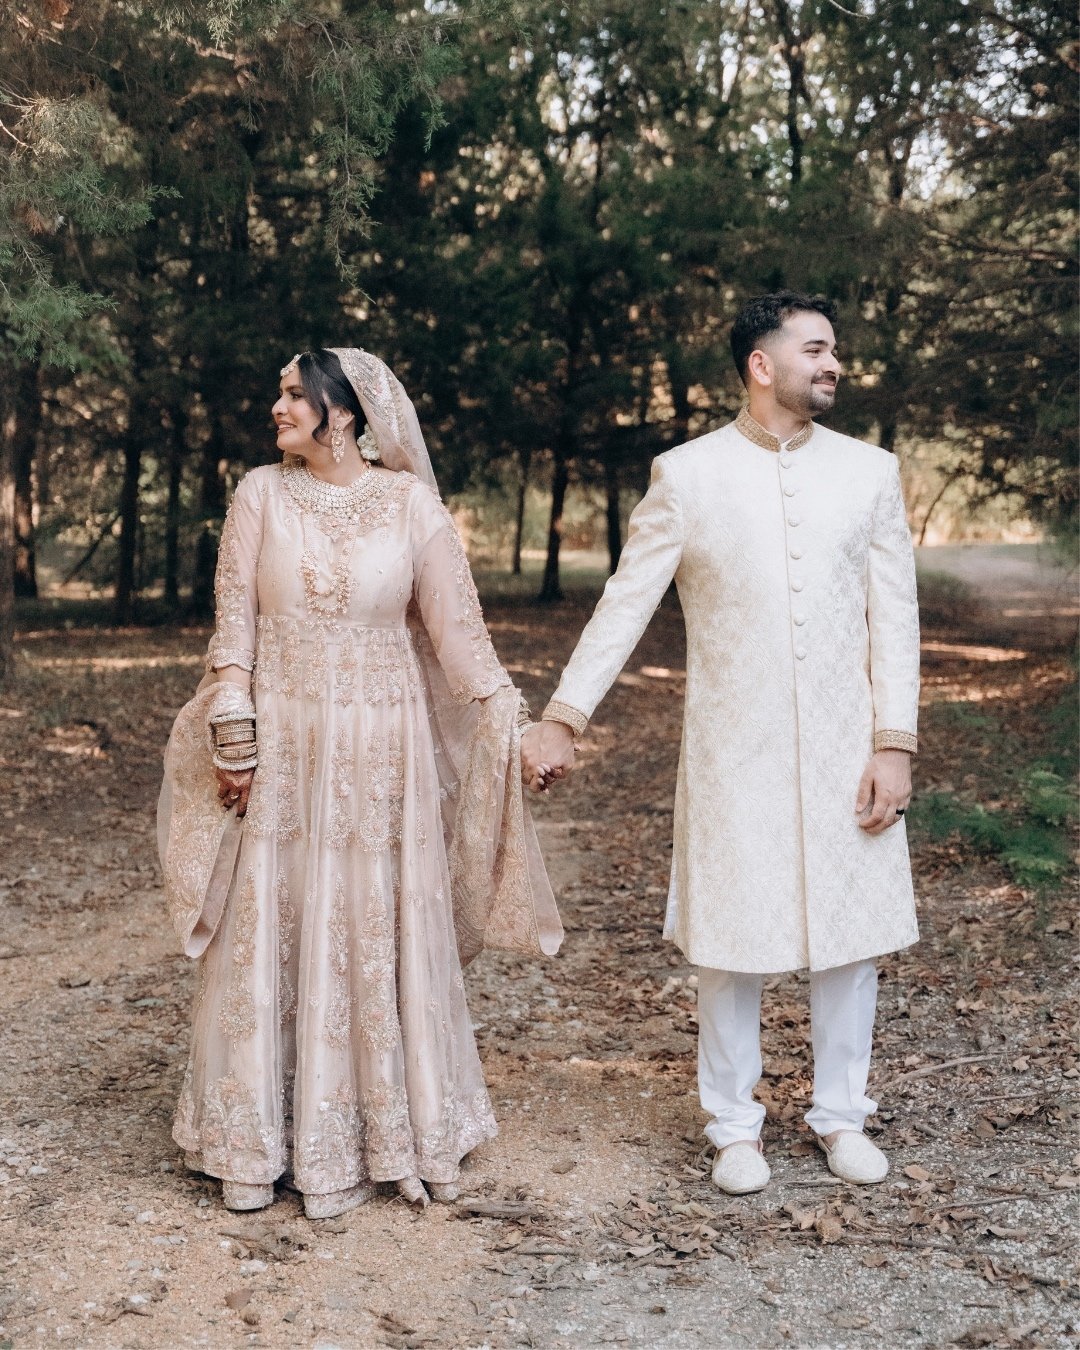 Quick moments before the 'game time' moment&mdash;a perfect way to start the day. 📸

#blackirisphotography #couplesmoments #smiles #glances #Love #weddingphotographer #destinationweddingphotographer #engagementphotographer #dallastexas #southasianph